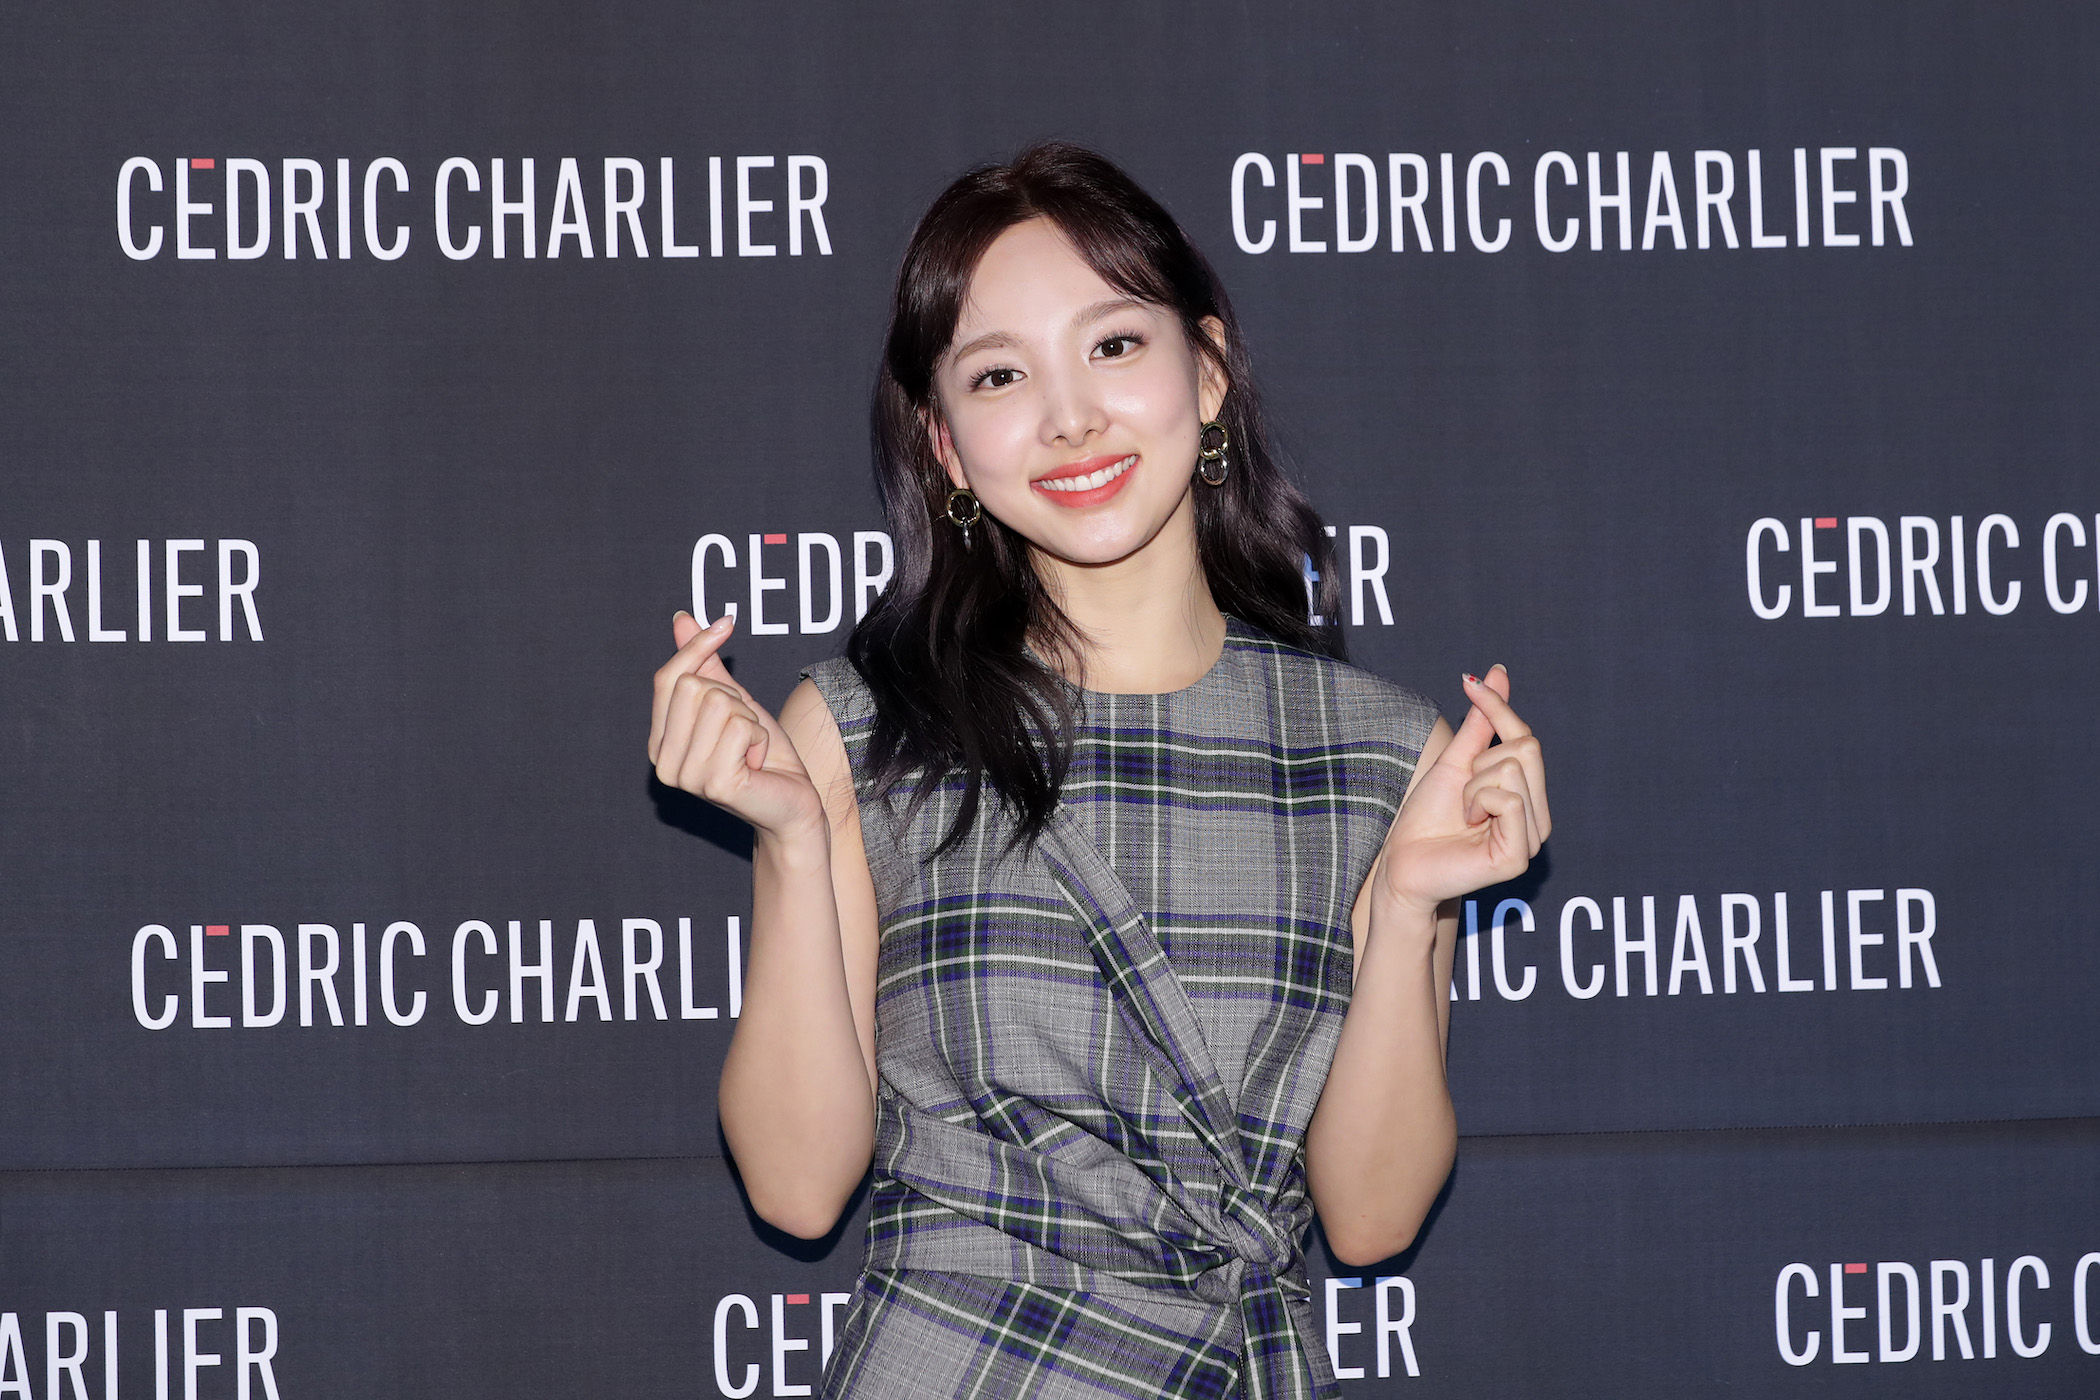 TWICE's Nayeon becomes new muse for Givenchy beauty - Bollywood